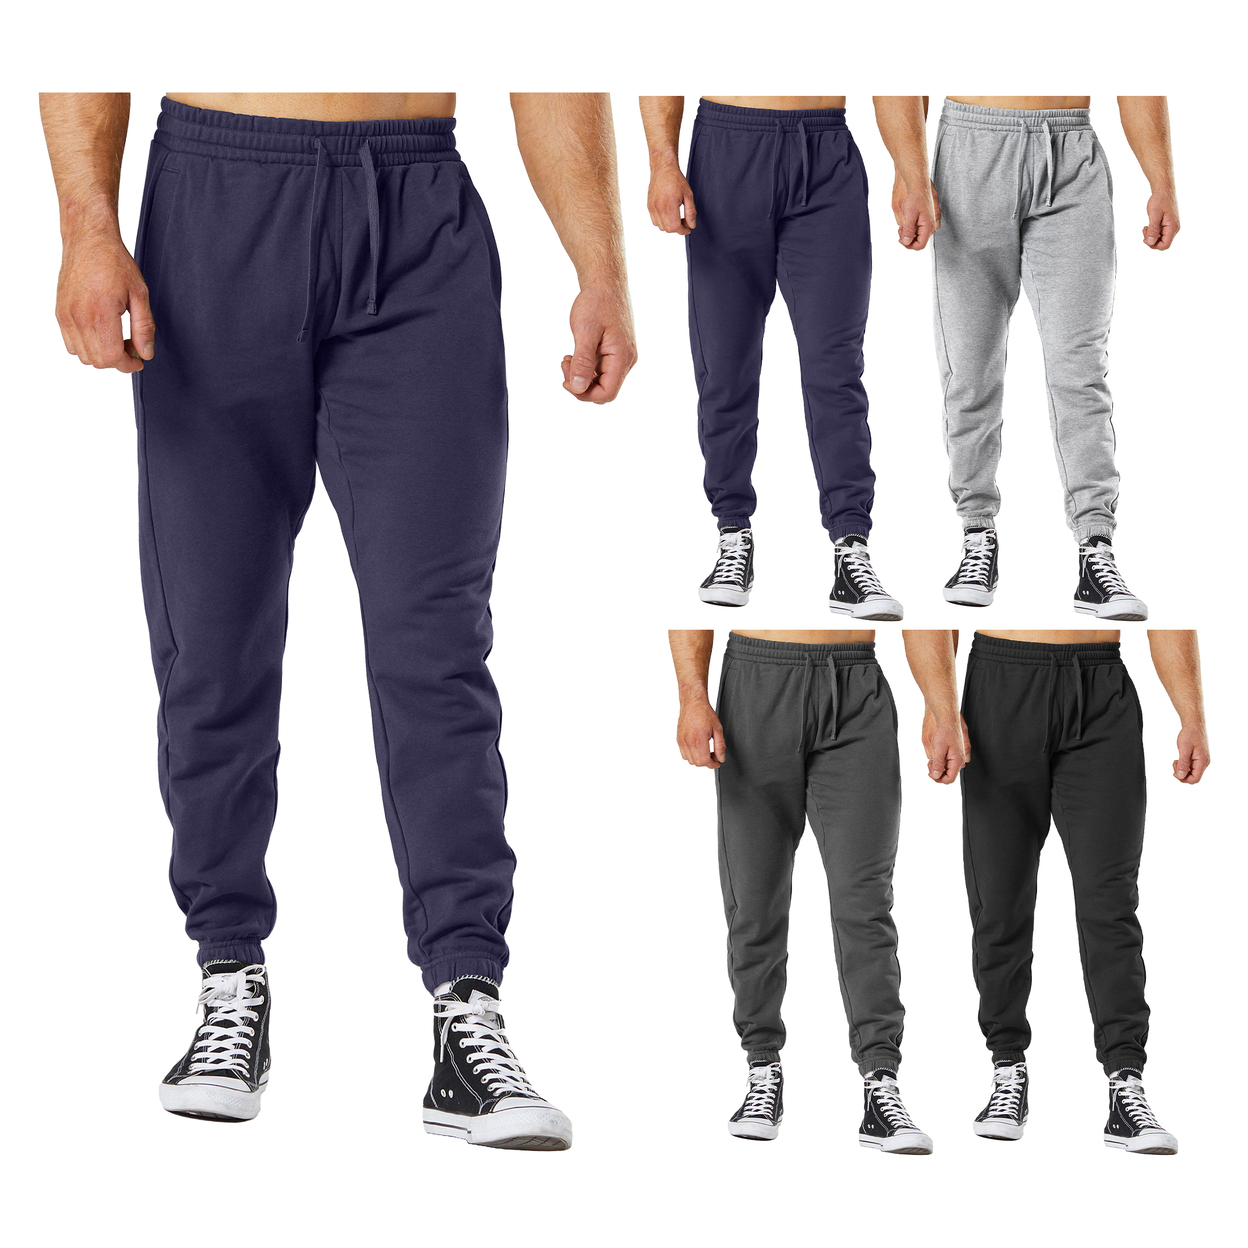 Multi-Pack: Men's Ultra-Soft Cozy Winter Warm Casual Fleece-Lined Sweatpants Jogger - 3-pack, Xx-large